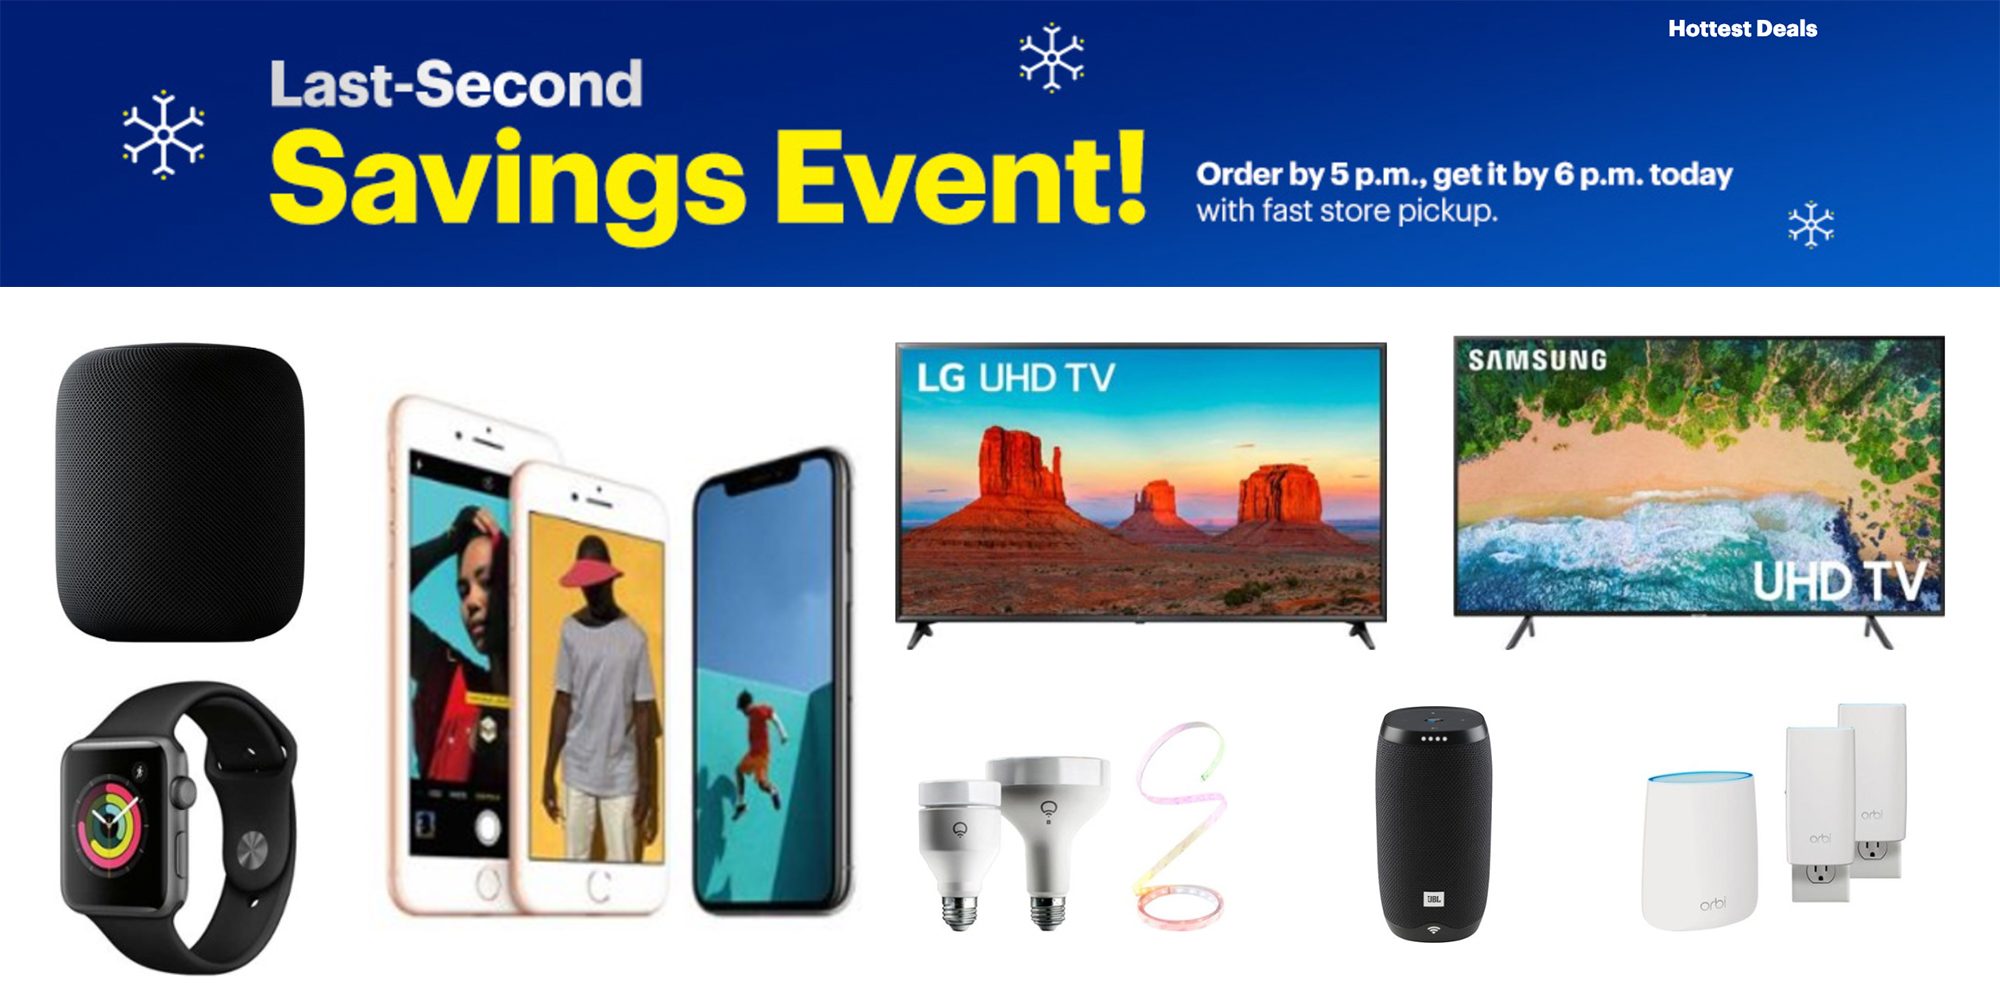 9to5Toys Lunch Break: Best Buy Last-Second Apple Event, Anker Powerline+ II Lightning Cable $13, Nike 25% off Sale, more